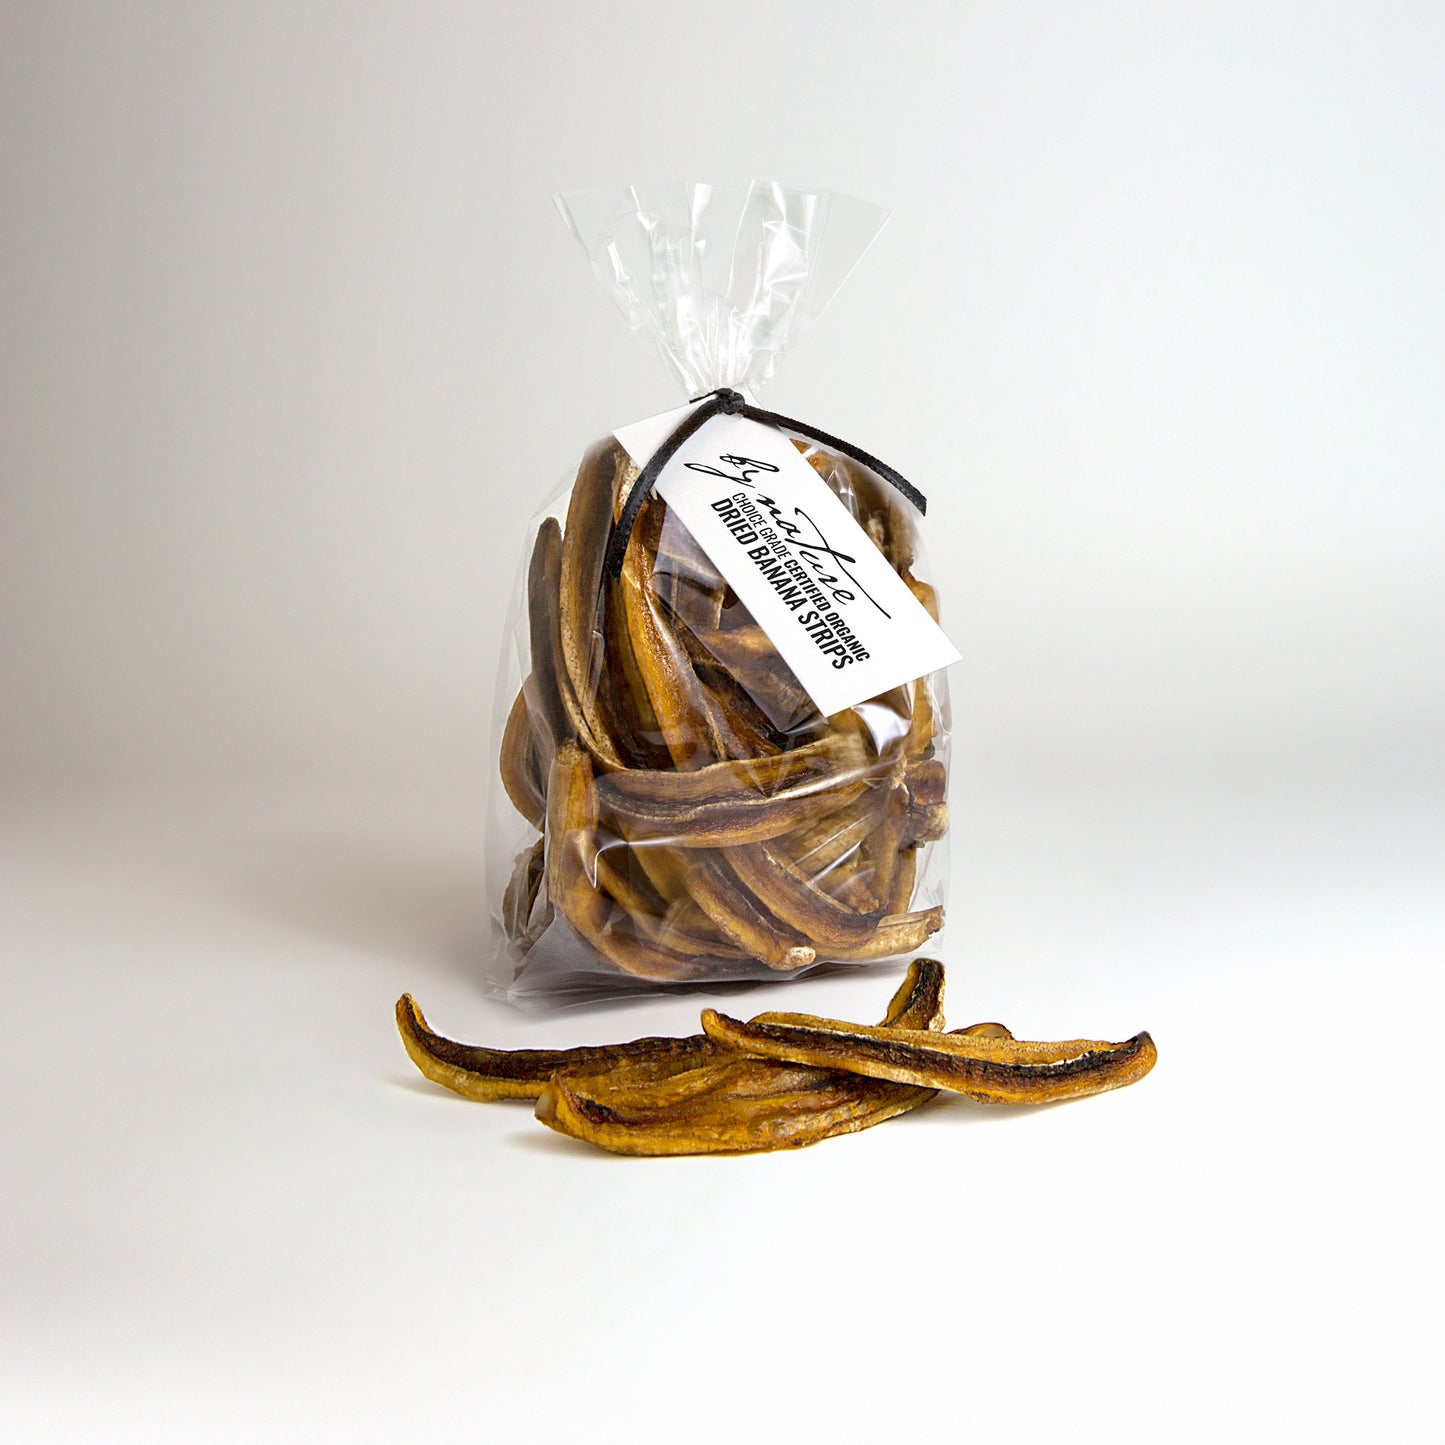 BY NATURE Dried Banana Strips, 100g - certified organic at source, preservative-free.